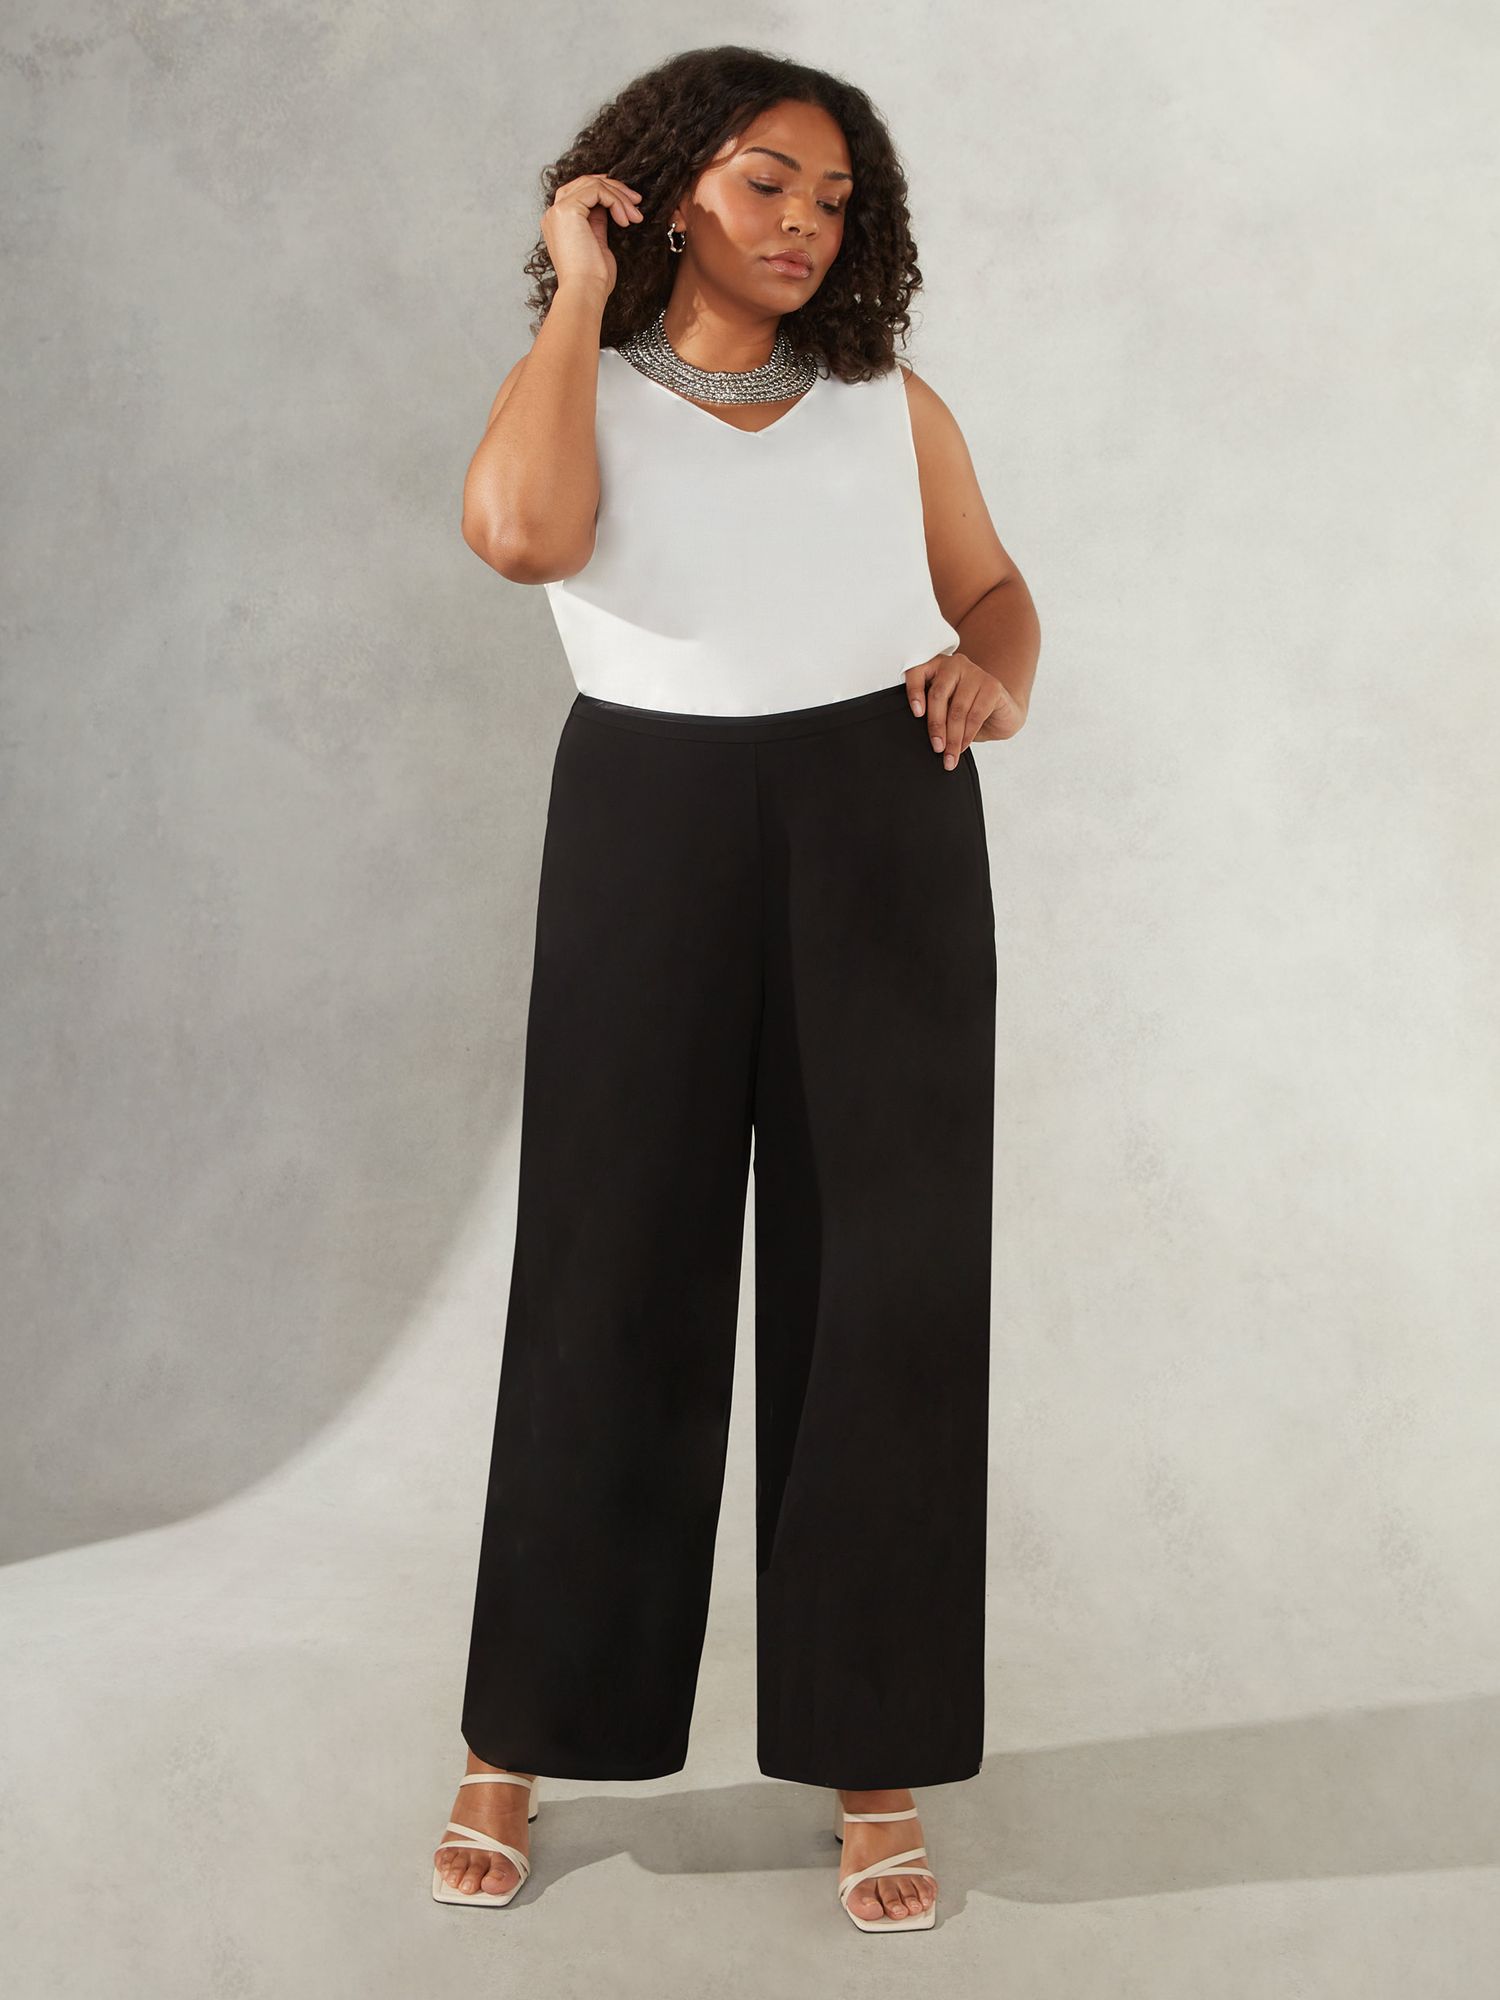 Buy Live Unlimited Curve Chiffon Lined Wide Leg Trousers, Black Online at johnlewis.com